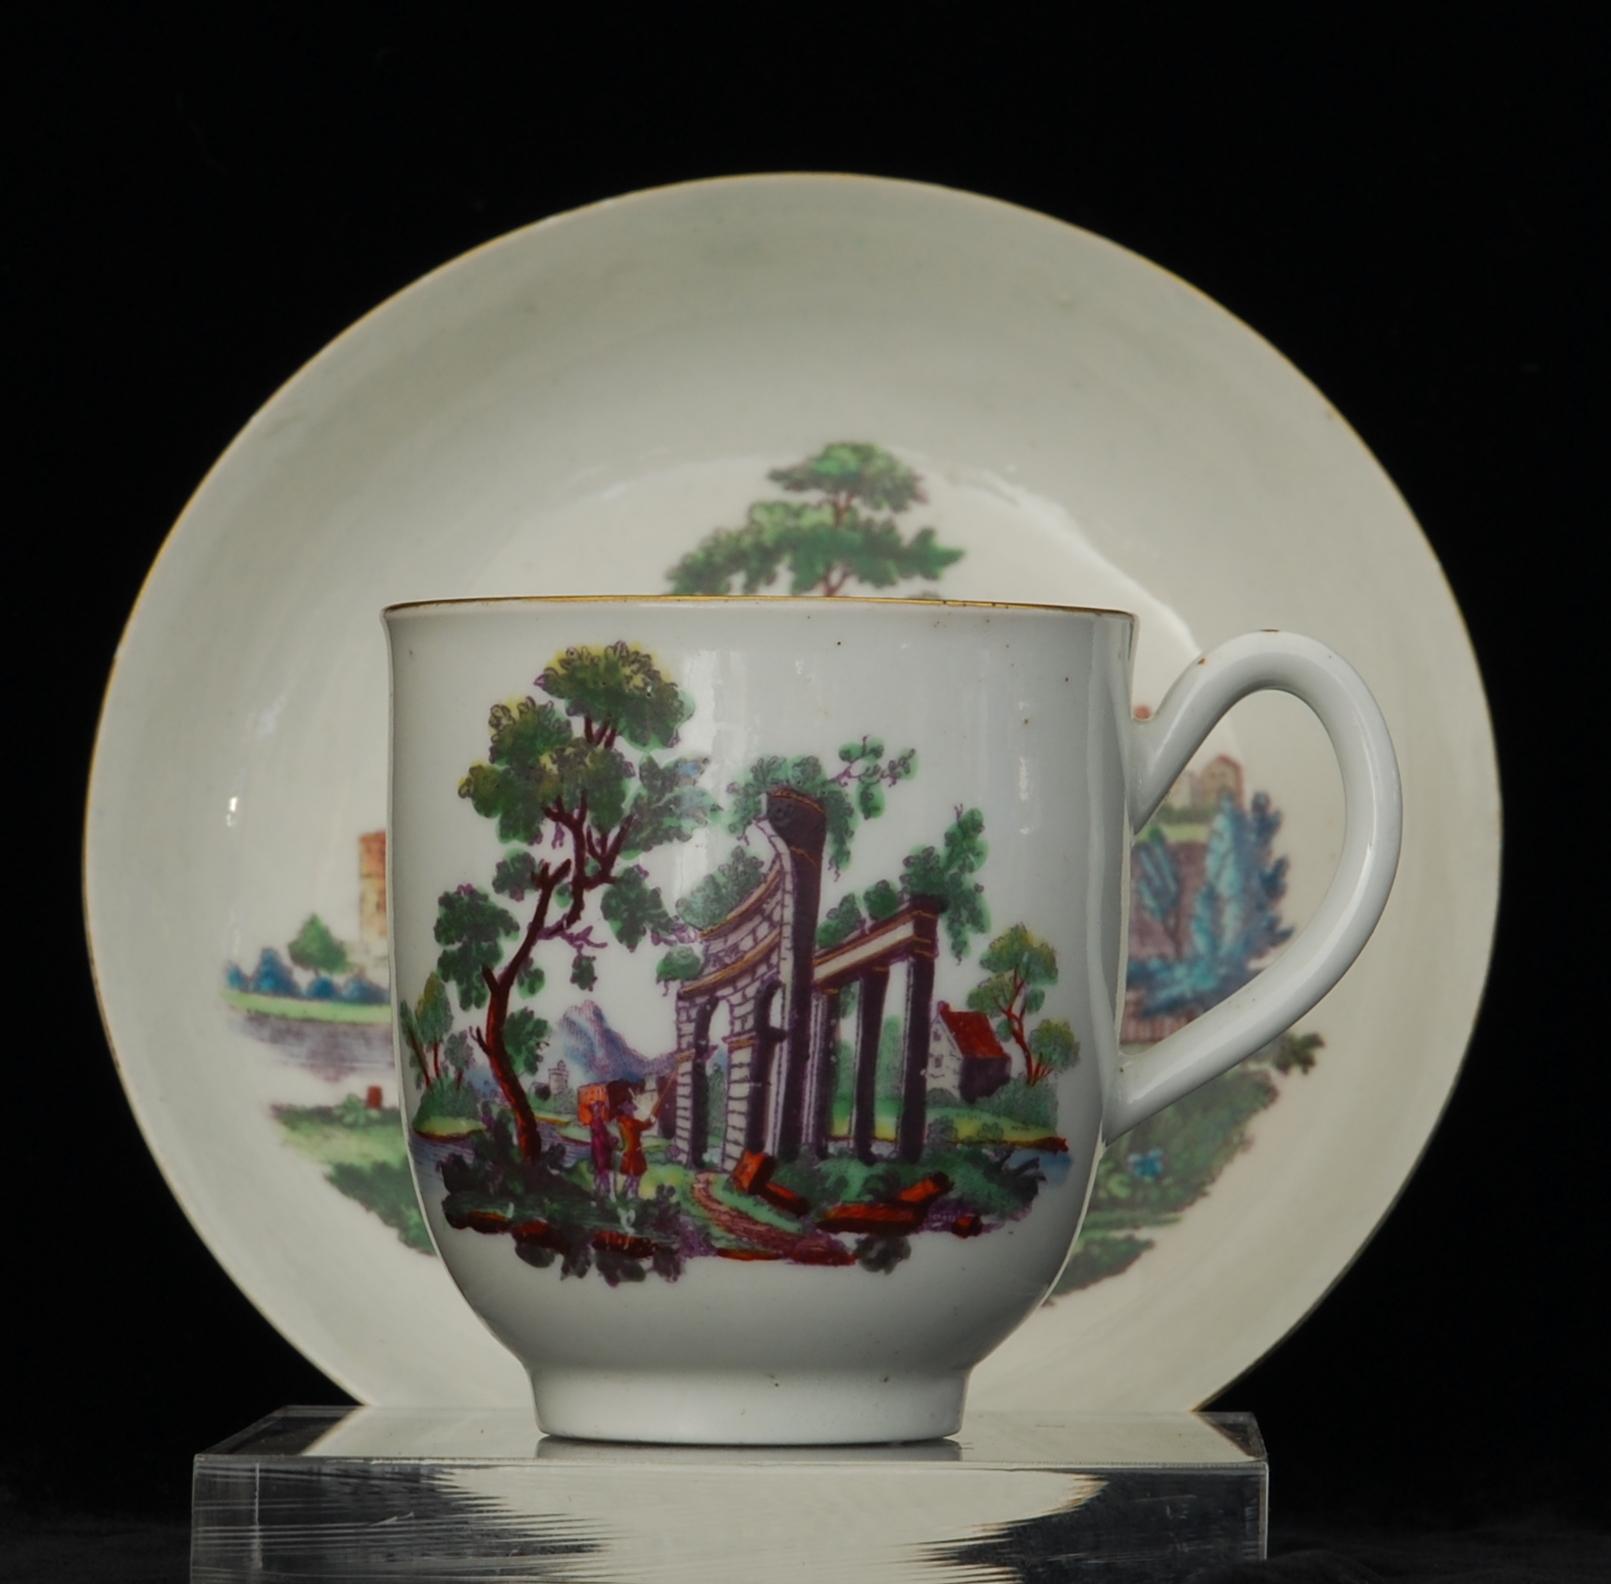 Coffee cup and saucer, decorated with a Hancock type print in black overglaze, which has then been coloured with enamels and highlighted with gilt. 

The decoration possibly James Giles Workshop; the palette is his and the style matches a signed